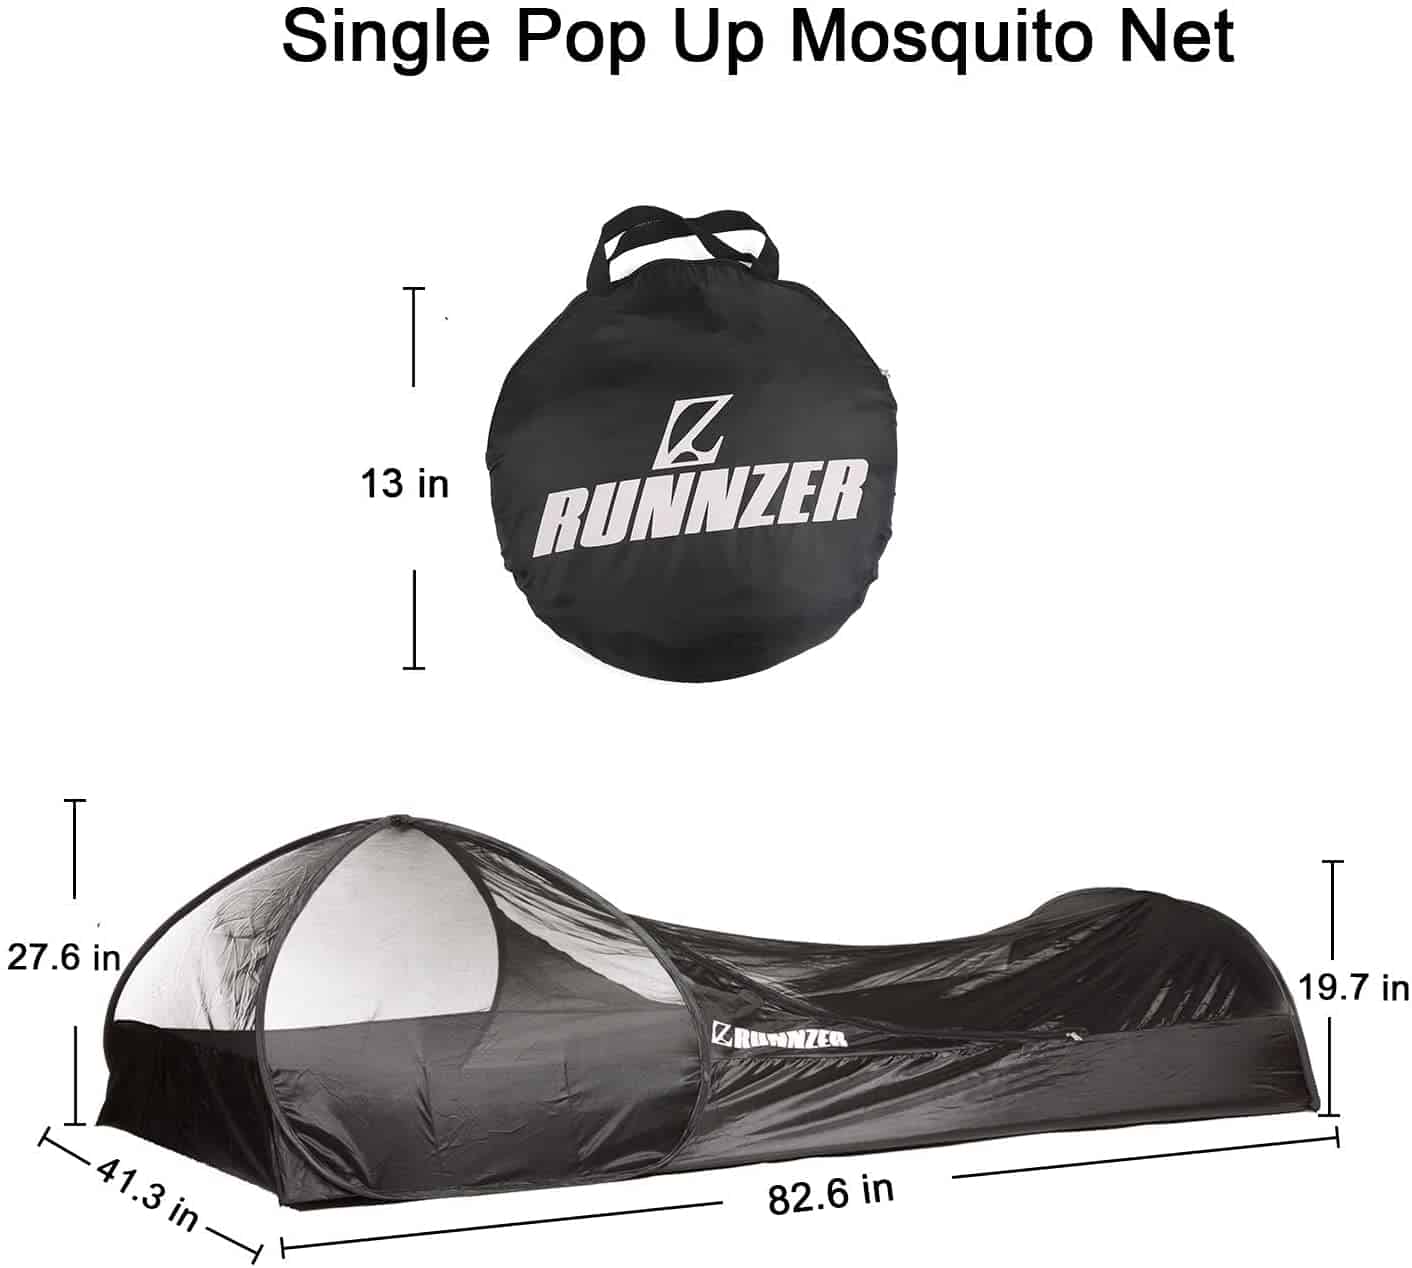 mosquito net tent for one person